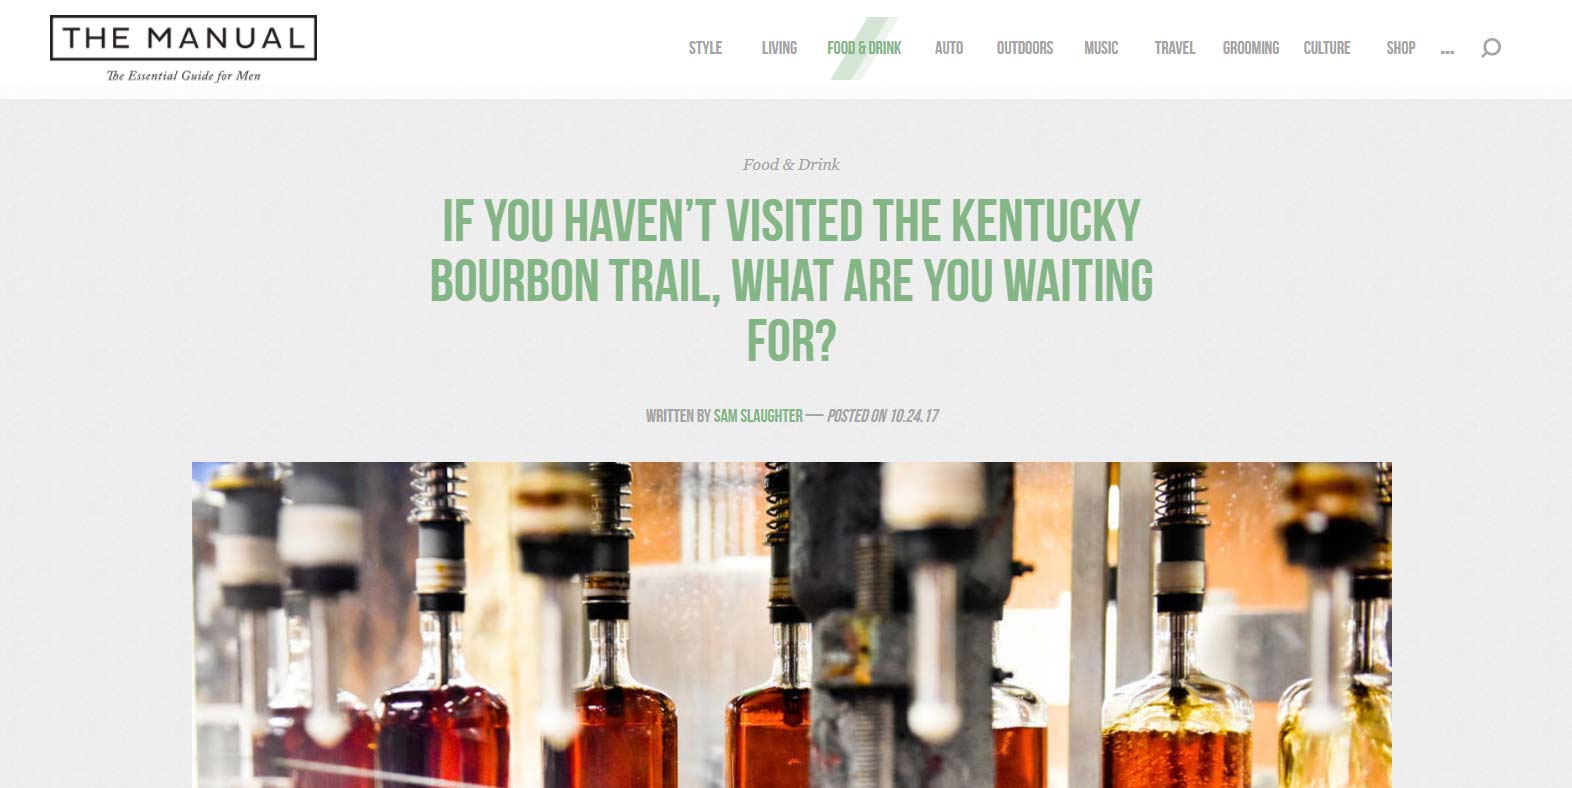 Article on TheManual.com about Kentucky Bourbon Trail and Mint Julep Tours